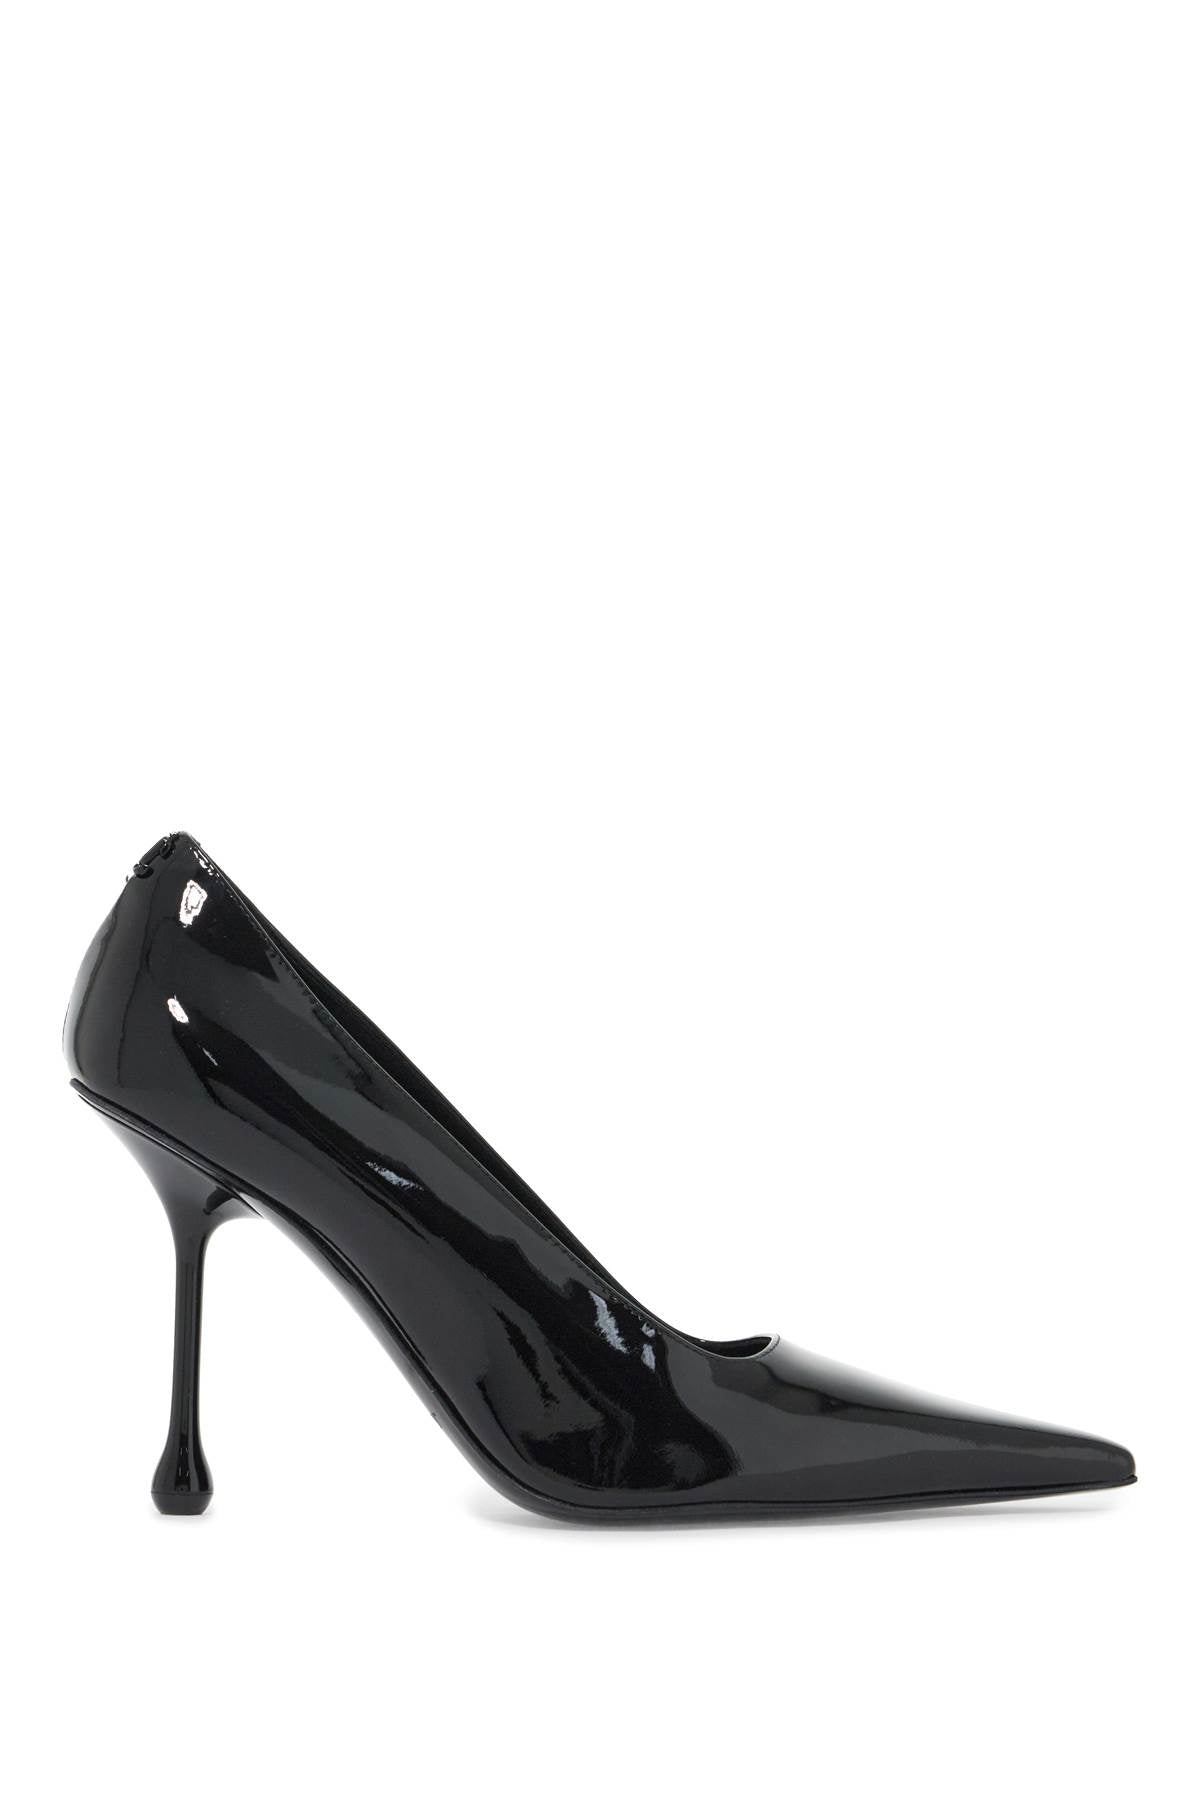 JIMMY CHOO IXIA 95 PATENT LEATHER Dé